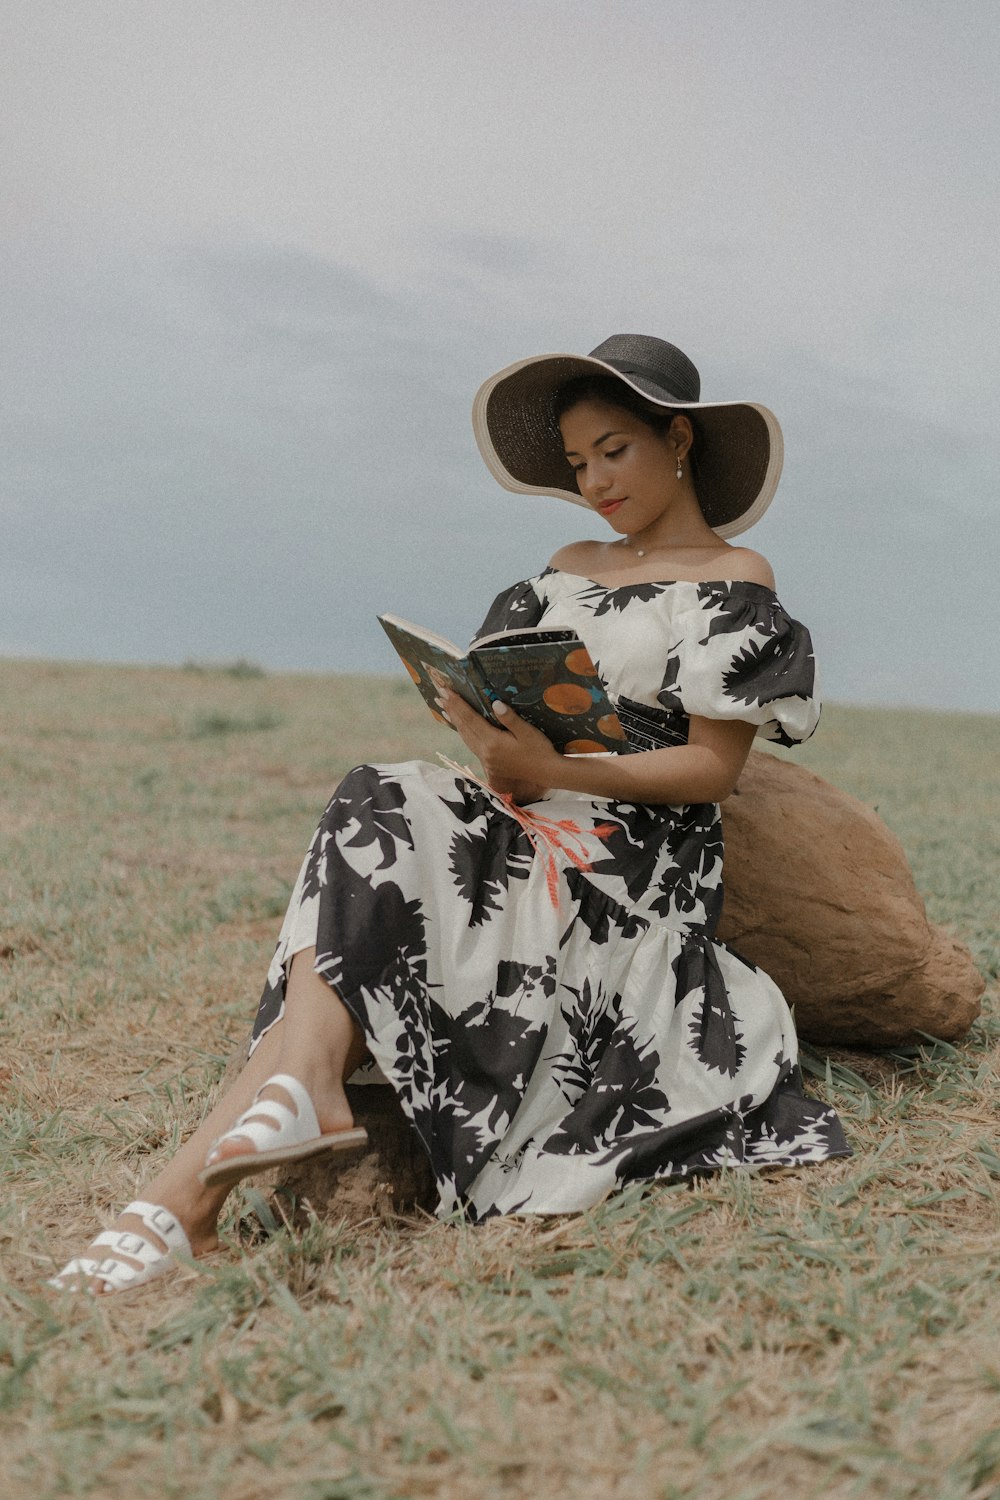 a woman sitting in a field reading a book